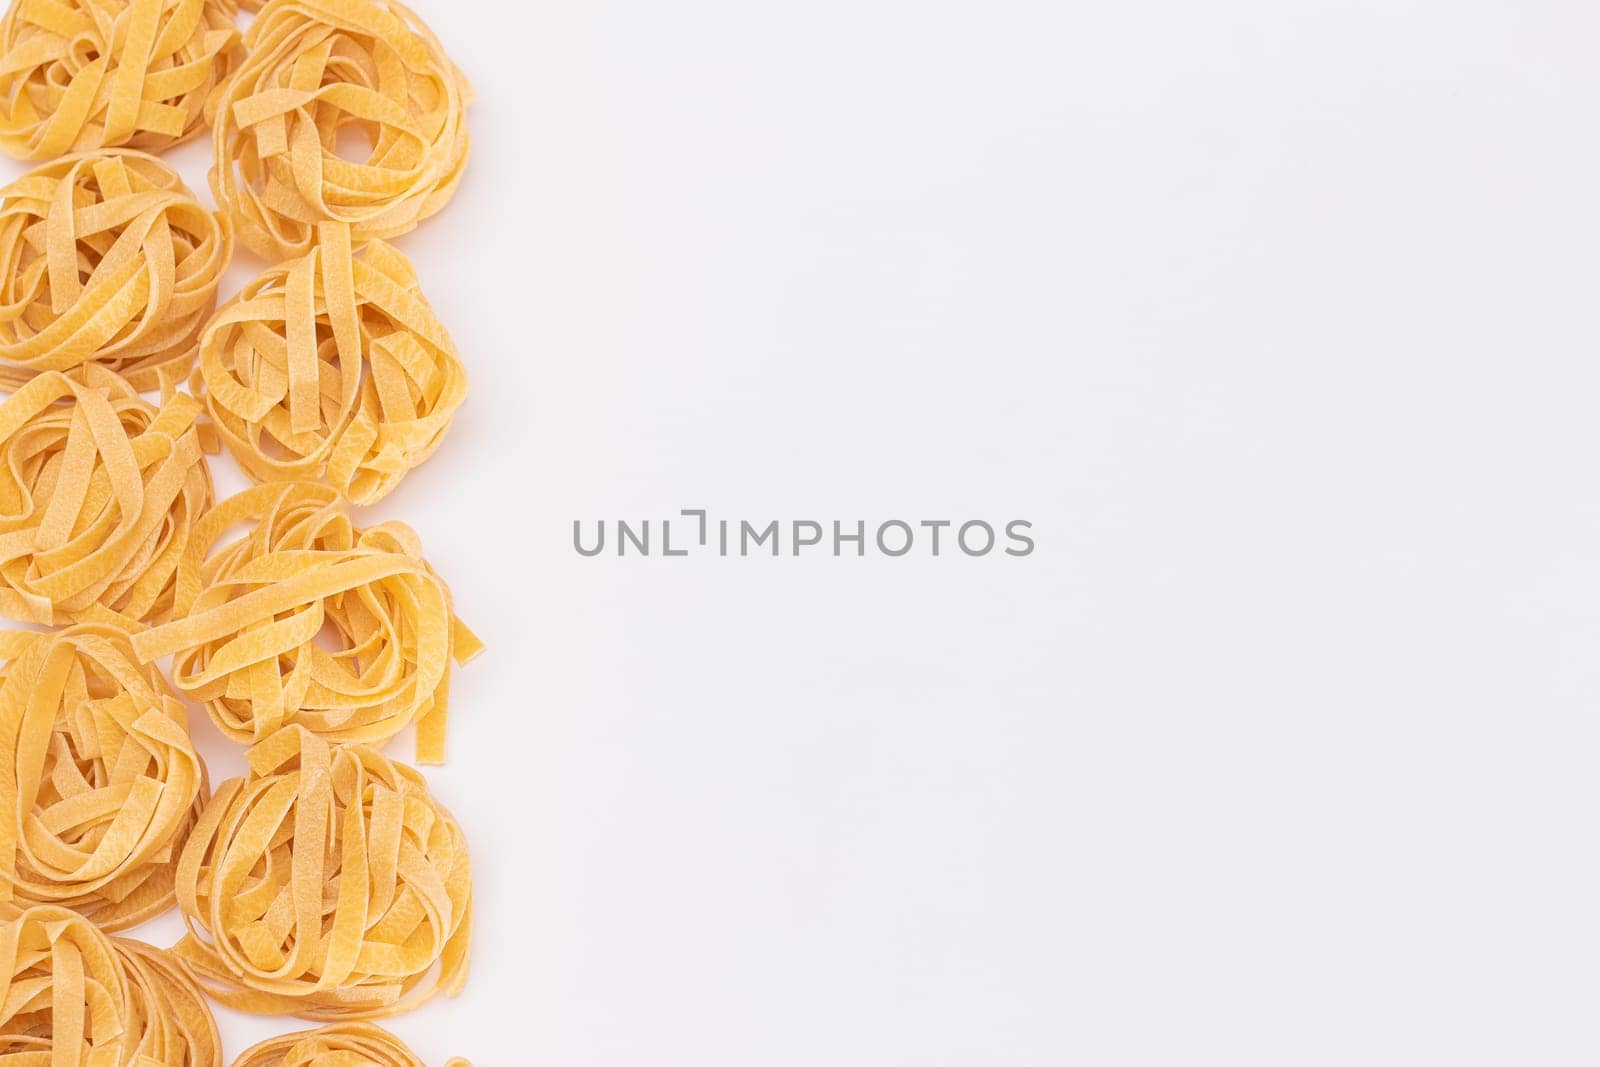 Classic Italian Raw Egg Fettuccine with Copy Spase on White Background. Dry Twisted Uncooked Pasta. Italian Culture and Cuisine. Raw Golden Macaroni Pattern